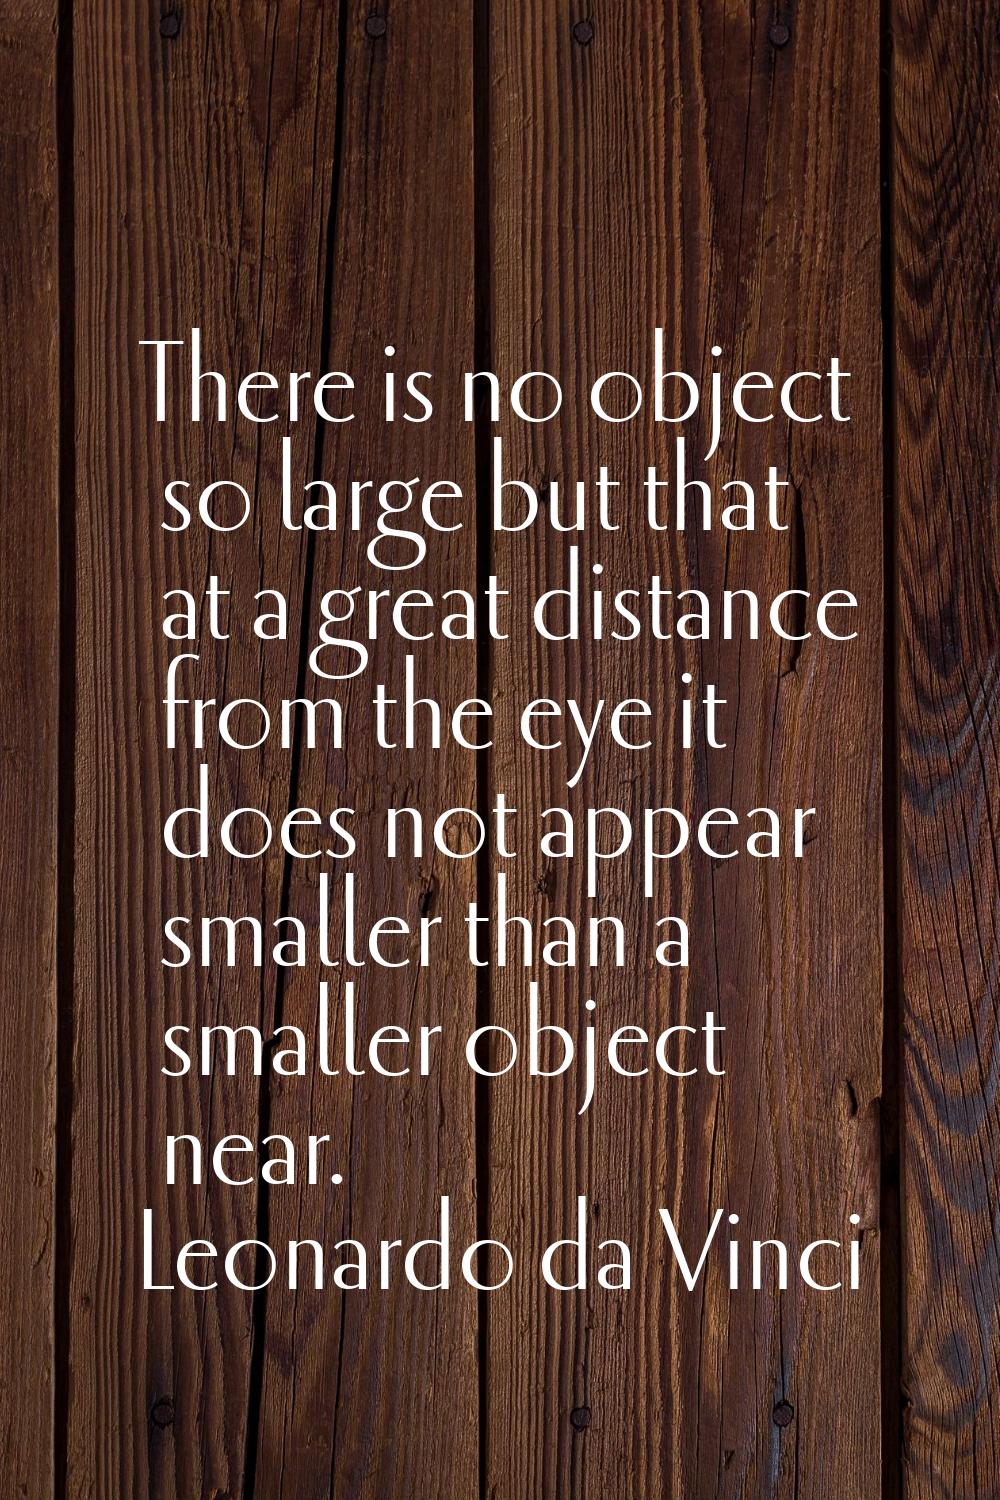 There is no object so large but that at a great distance from the eye it does not appear smaller th